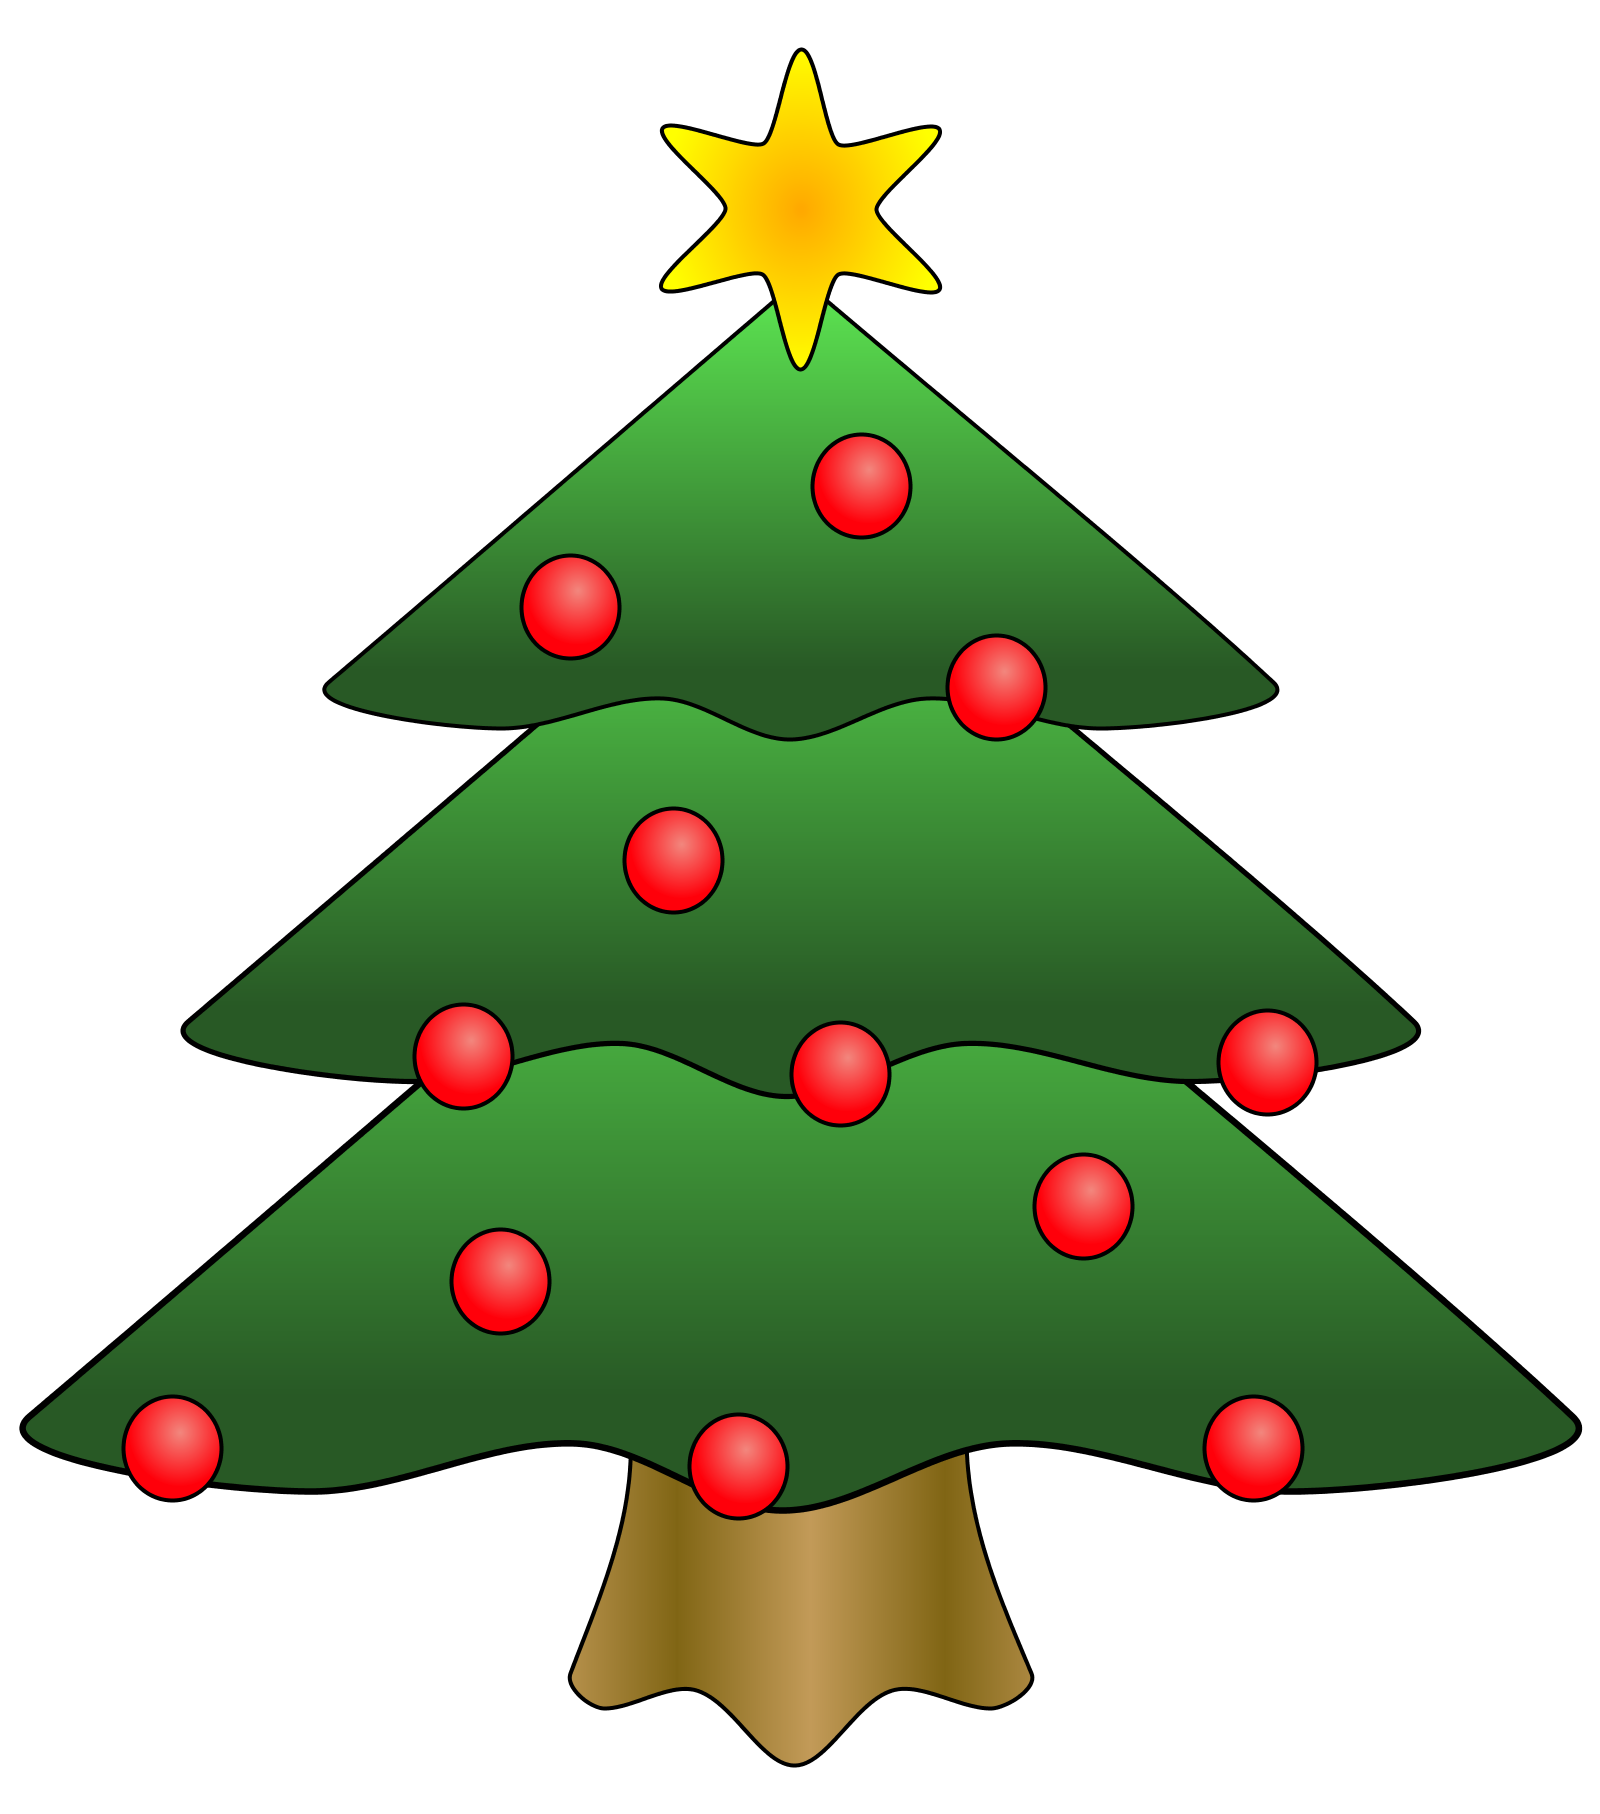 Clip Art Of Christmas Tree Picture 143799 Royalty Free Vector ...